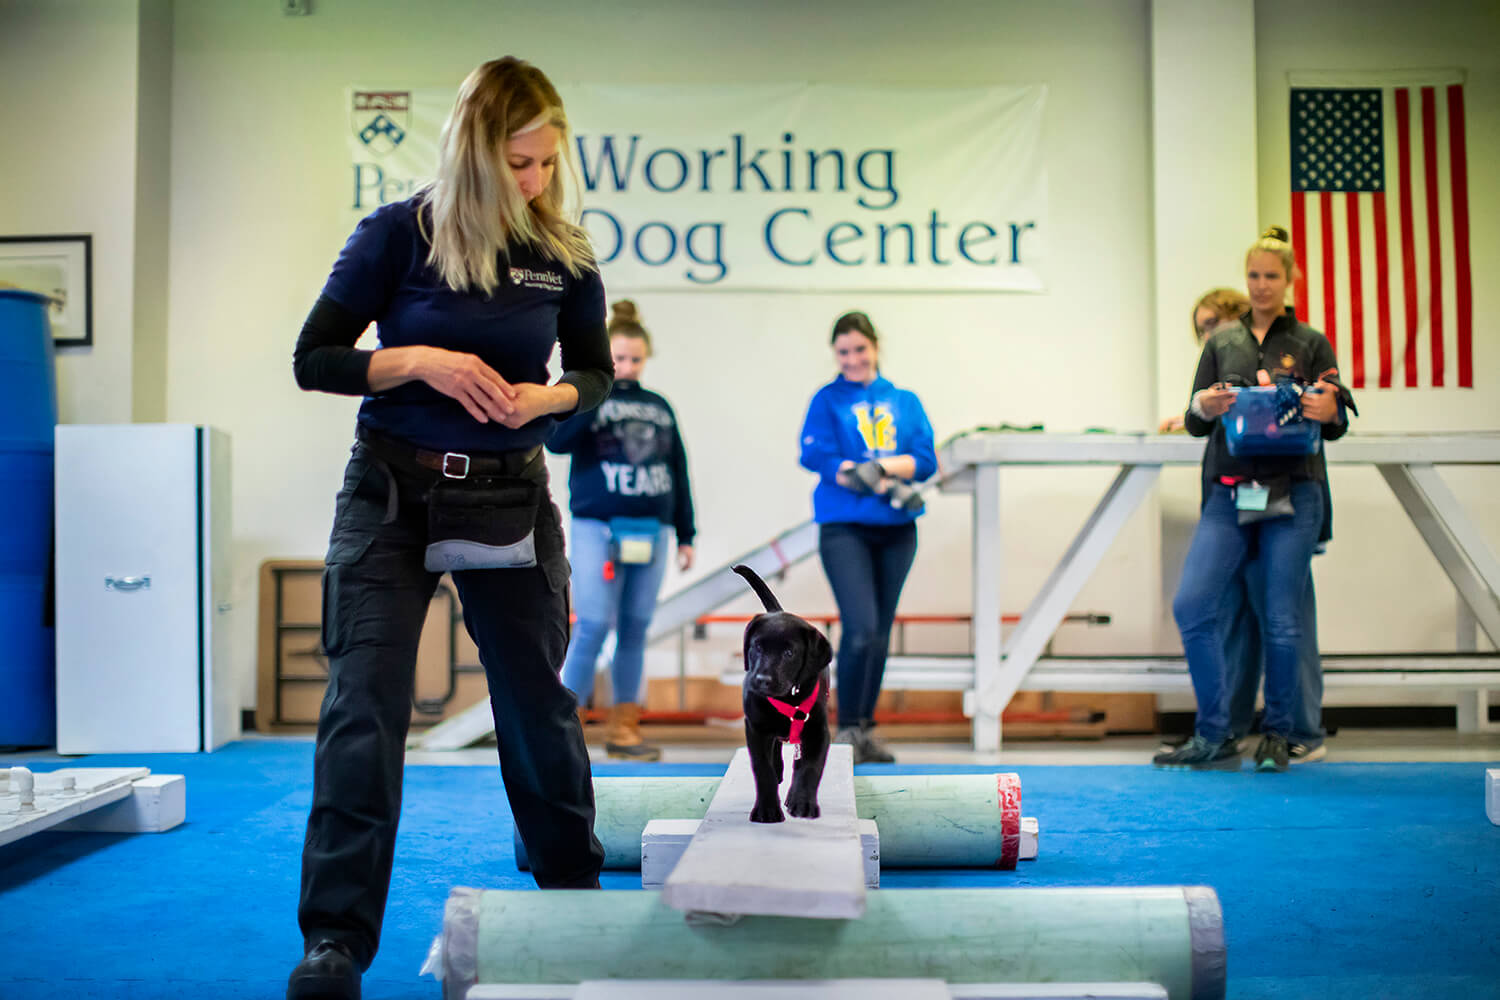 Trainers erect various obstacles and challenges for the puppies to navigate, helping them improve their agility and also conquer any fears. “The genetics are shining through in these dogs,” says Berger, encouraging Uman to cross a narrow plank.